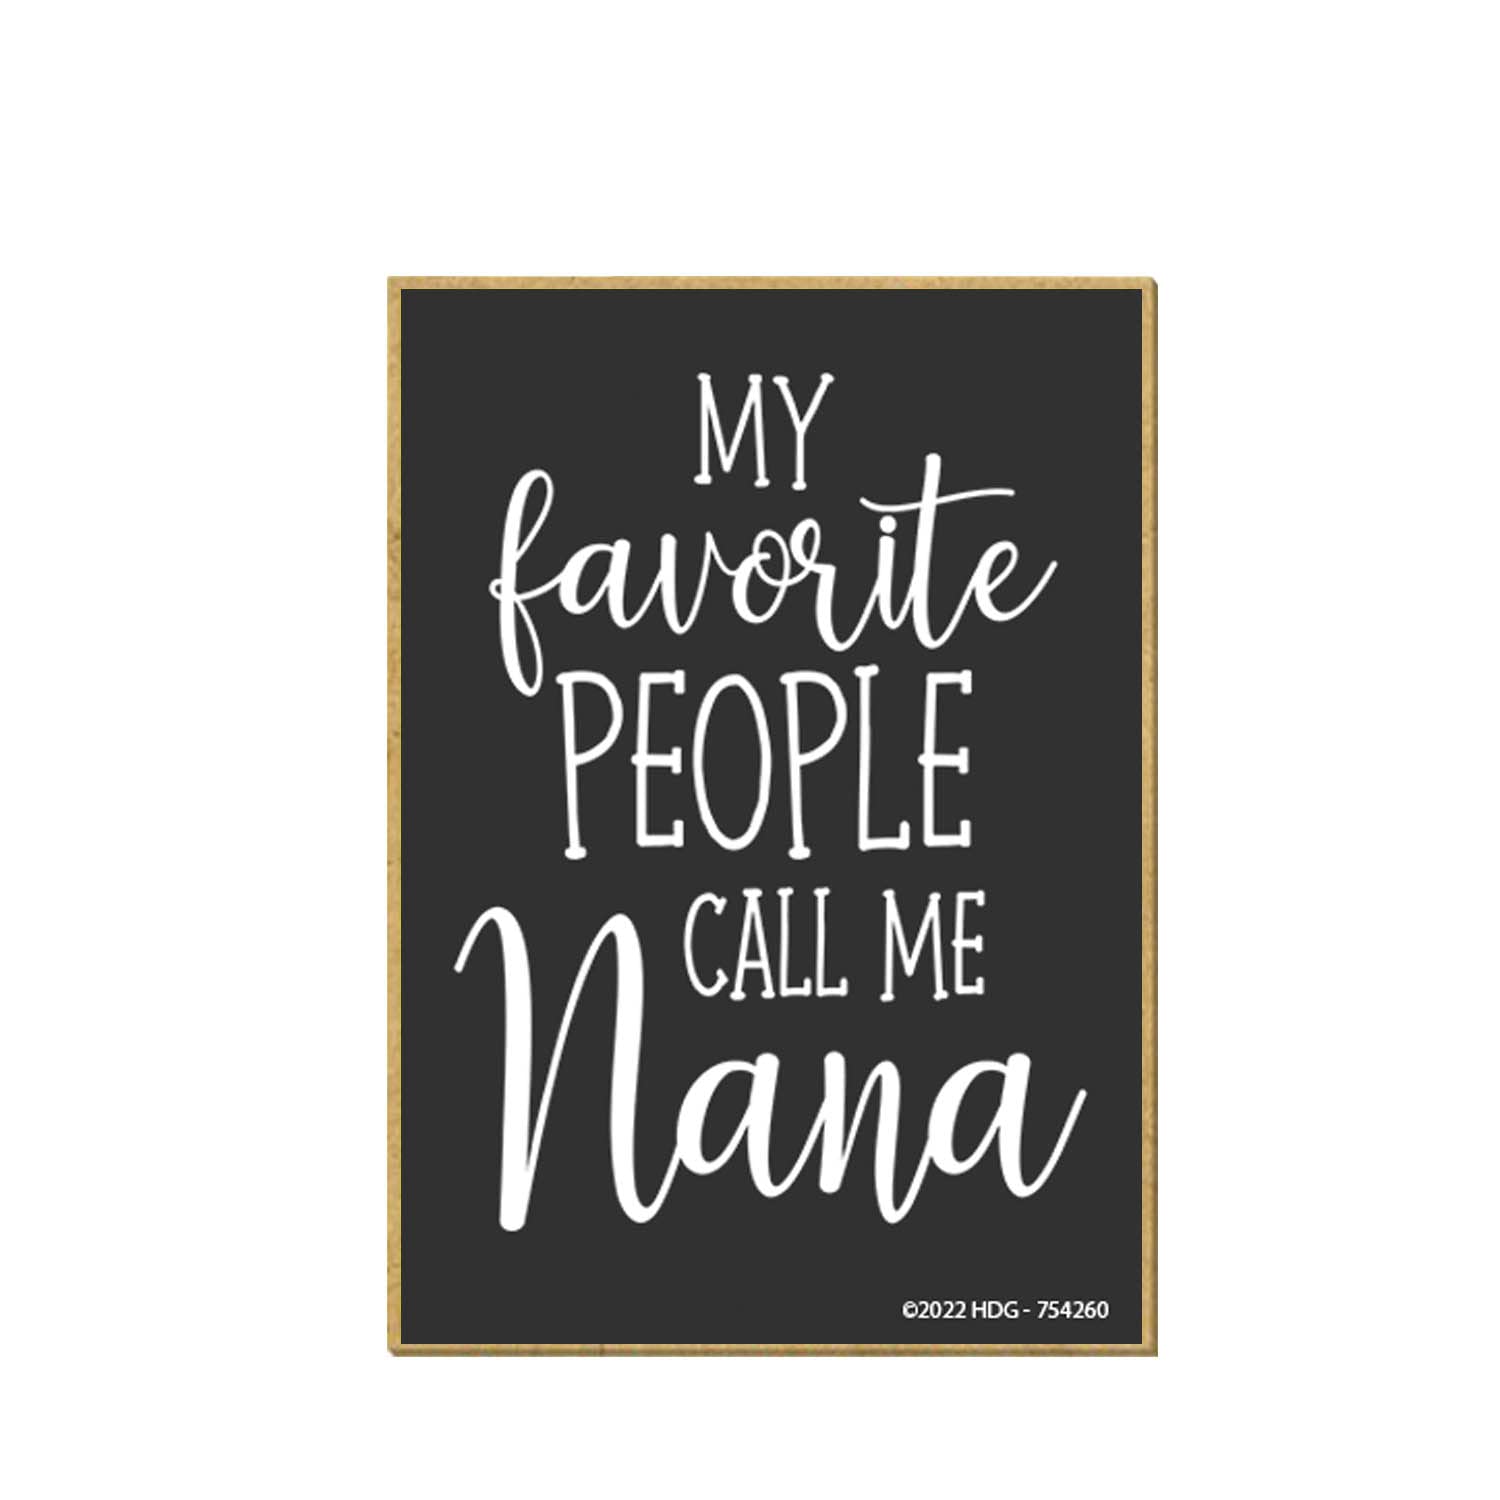 Honey Dew Gifts, My Favorite People Call Me Nana, 2.5 inch by 3.5 inch, Made in USA, Refrigerator Magnets, Fridge Magnets, Decorative Sayings Magnets, Granny Gifts, Grandparents Day Gift, Nana Gift